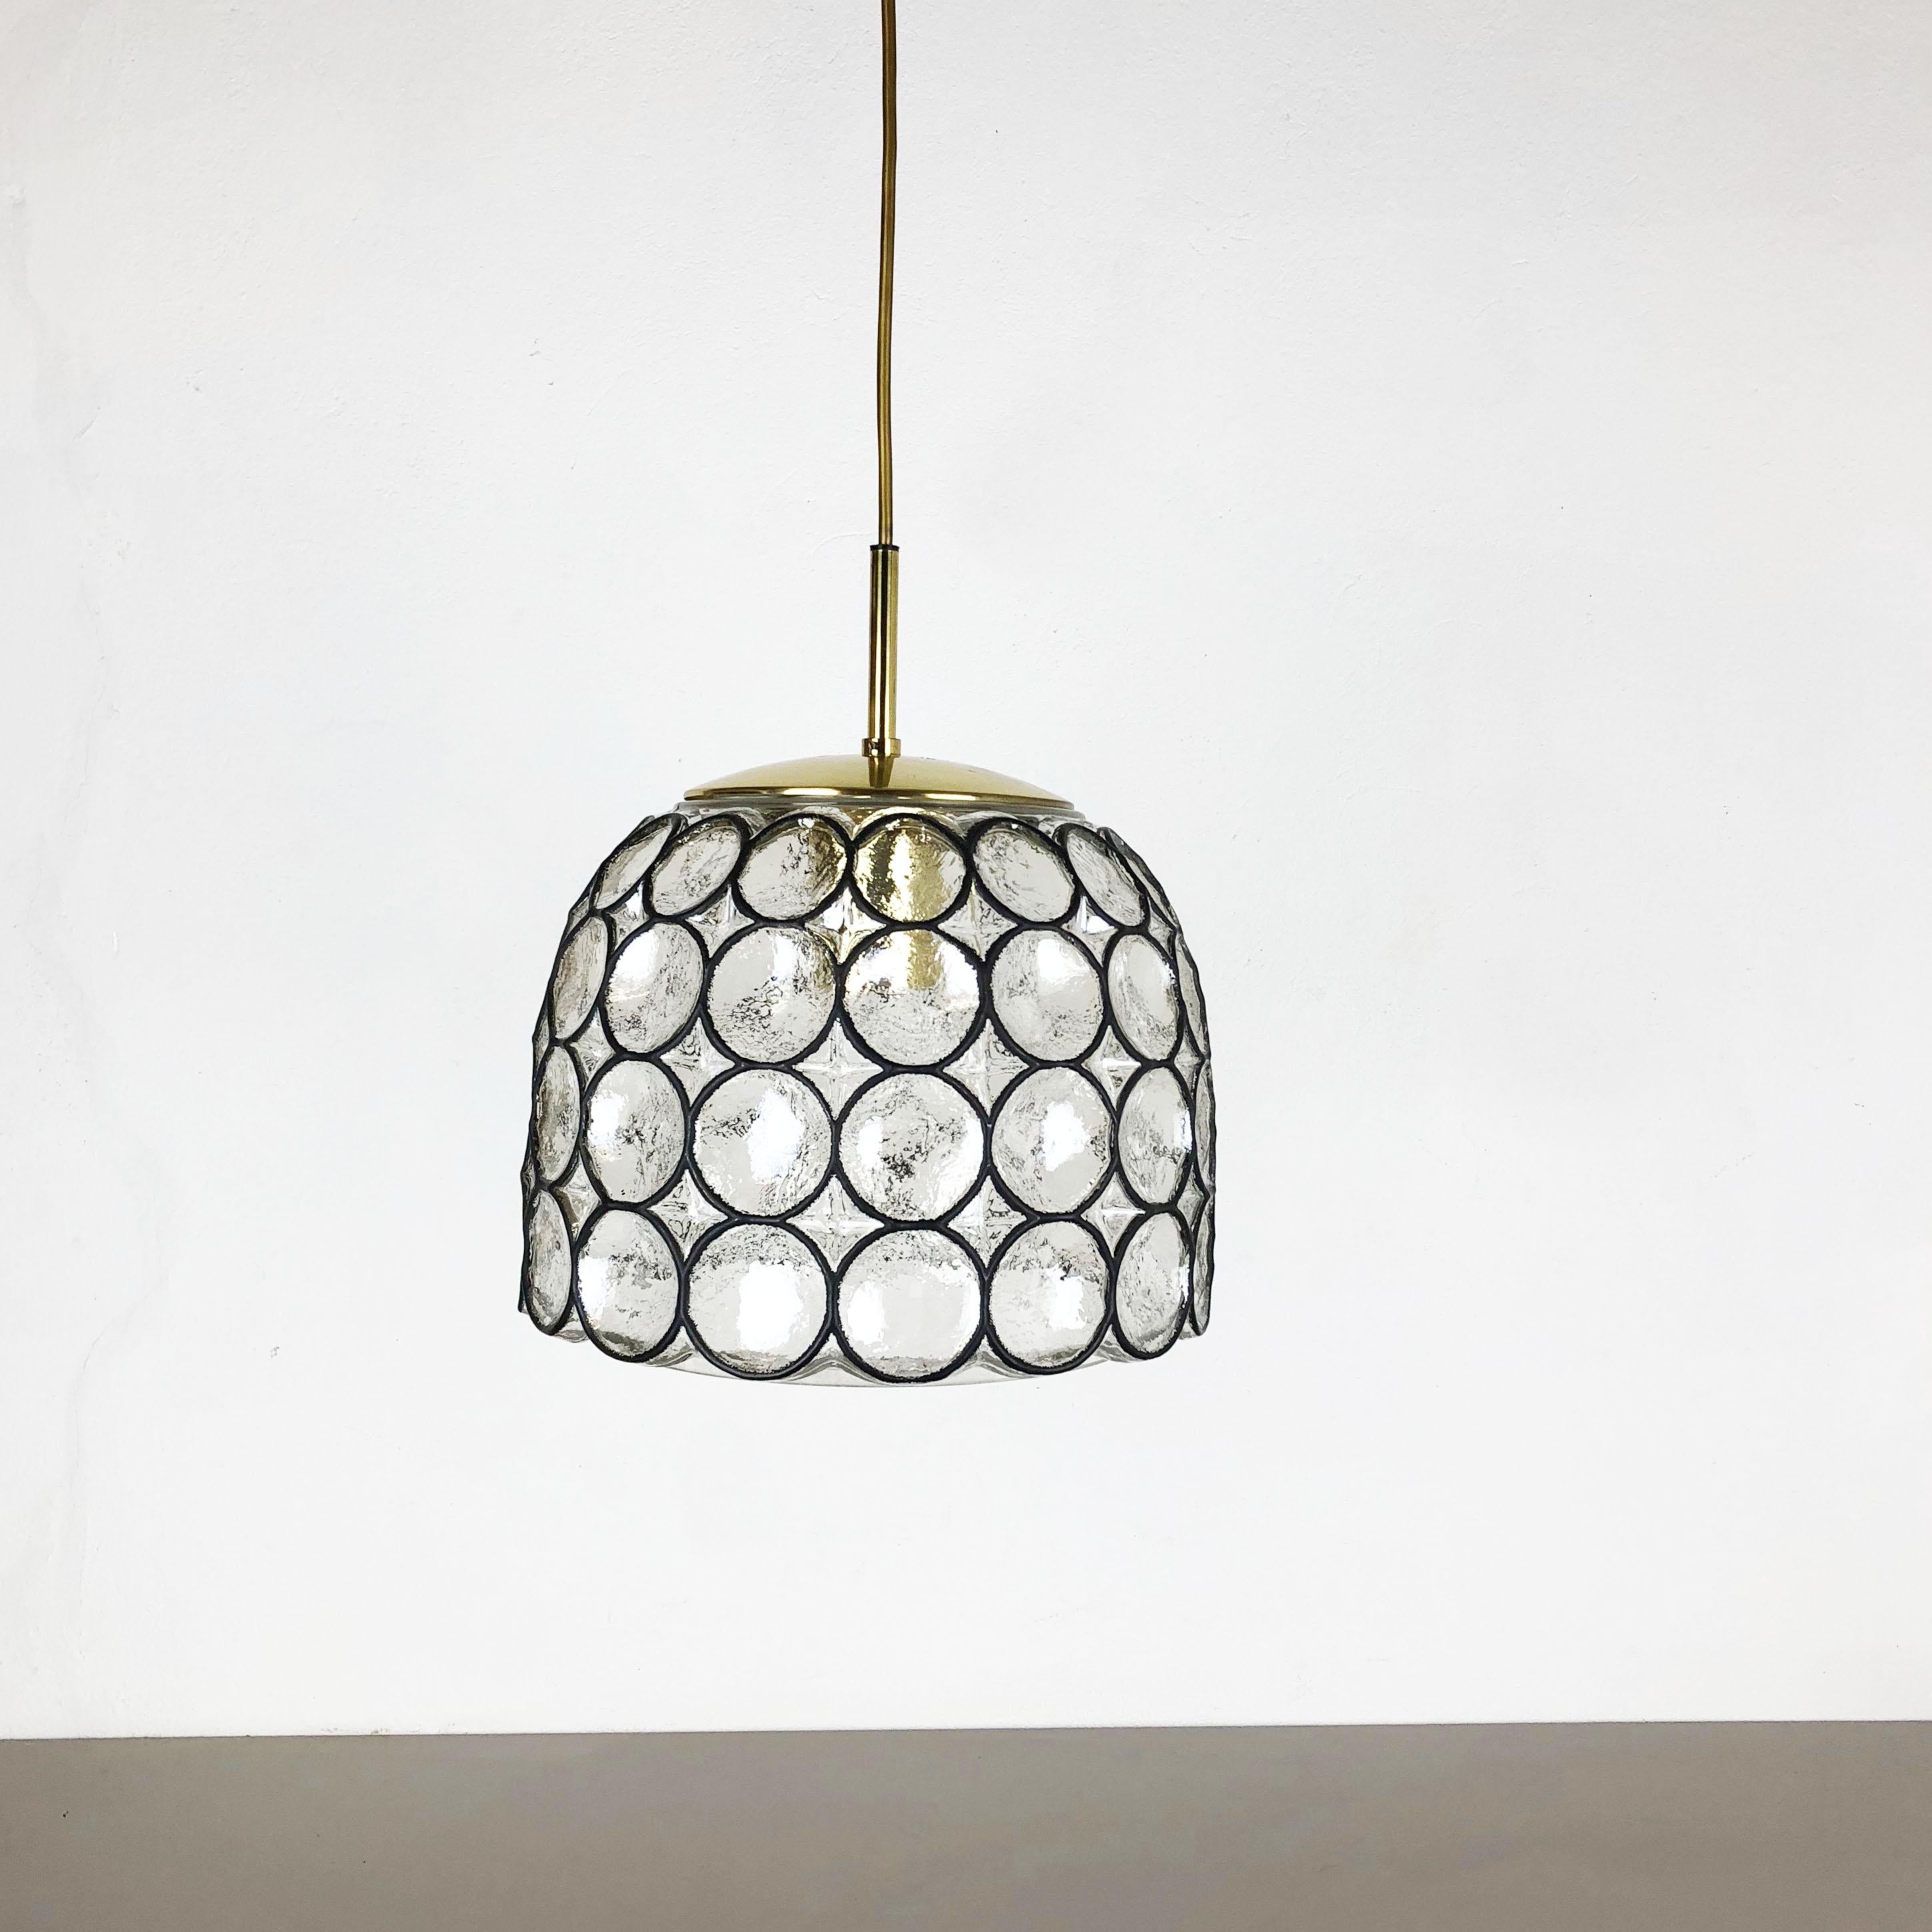 Article:

hanging light extra large


Producer:

Glashütte Limburg, Germany



Origin:

Germany



Age:

1970s



Original 1970s modernist German Hanging Light made of high quality glass with black ring within the glass. the light is part of the so